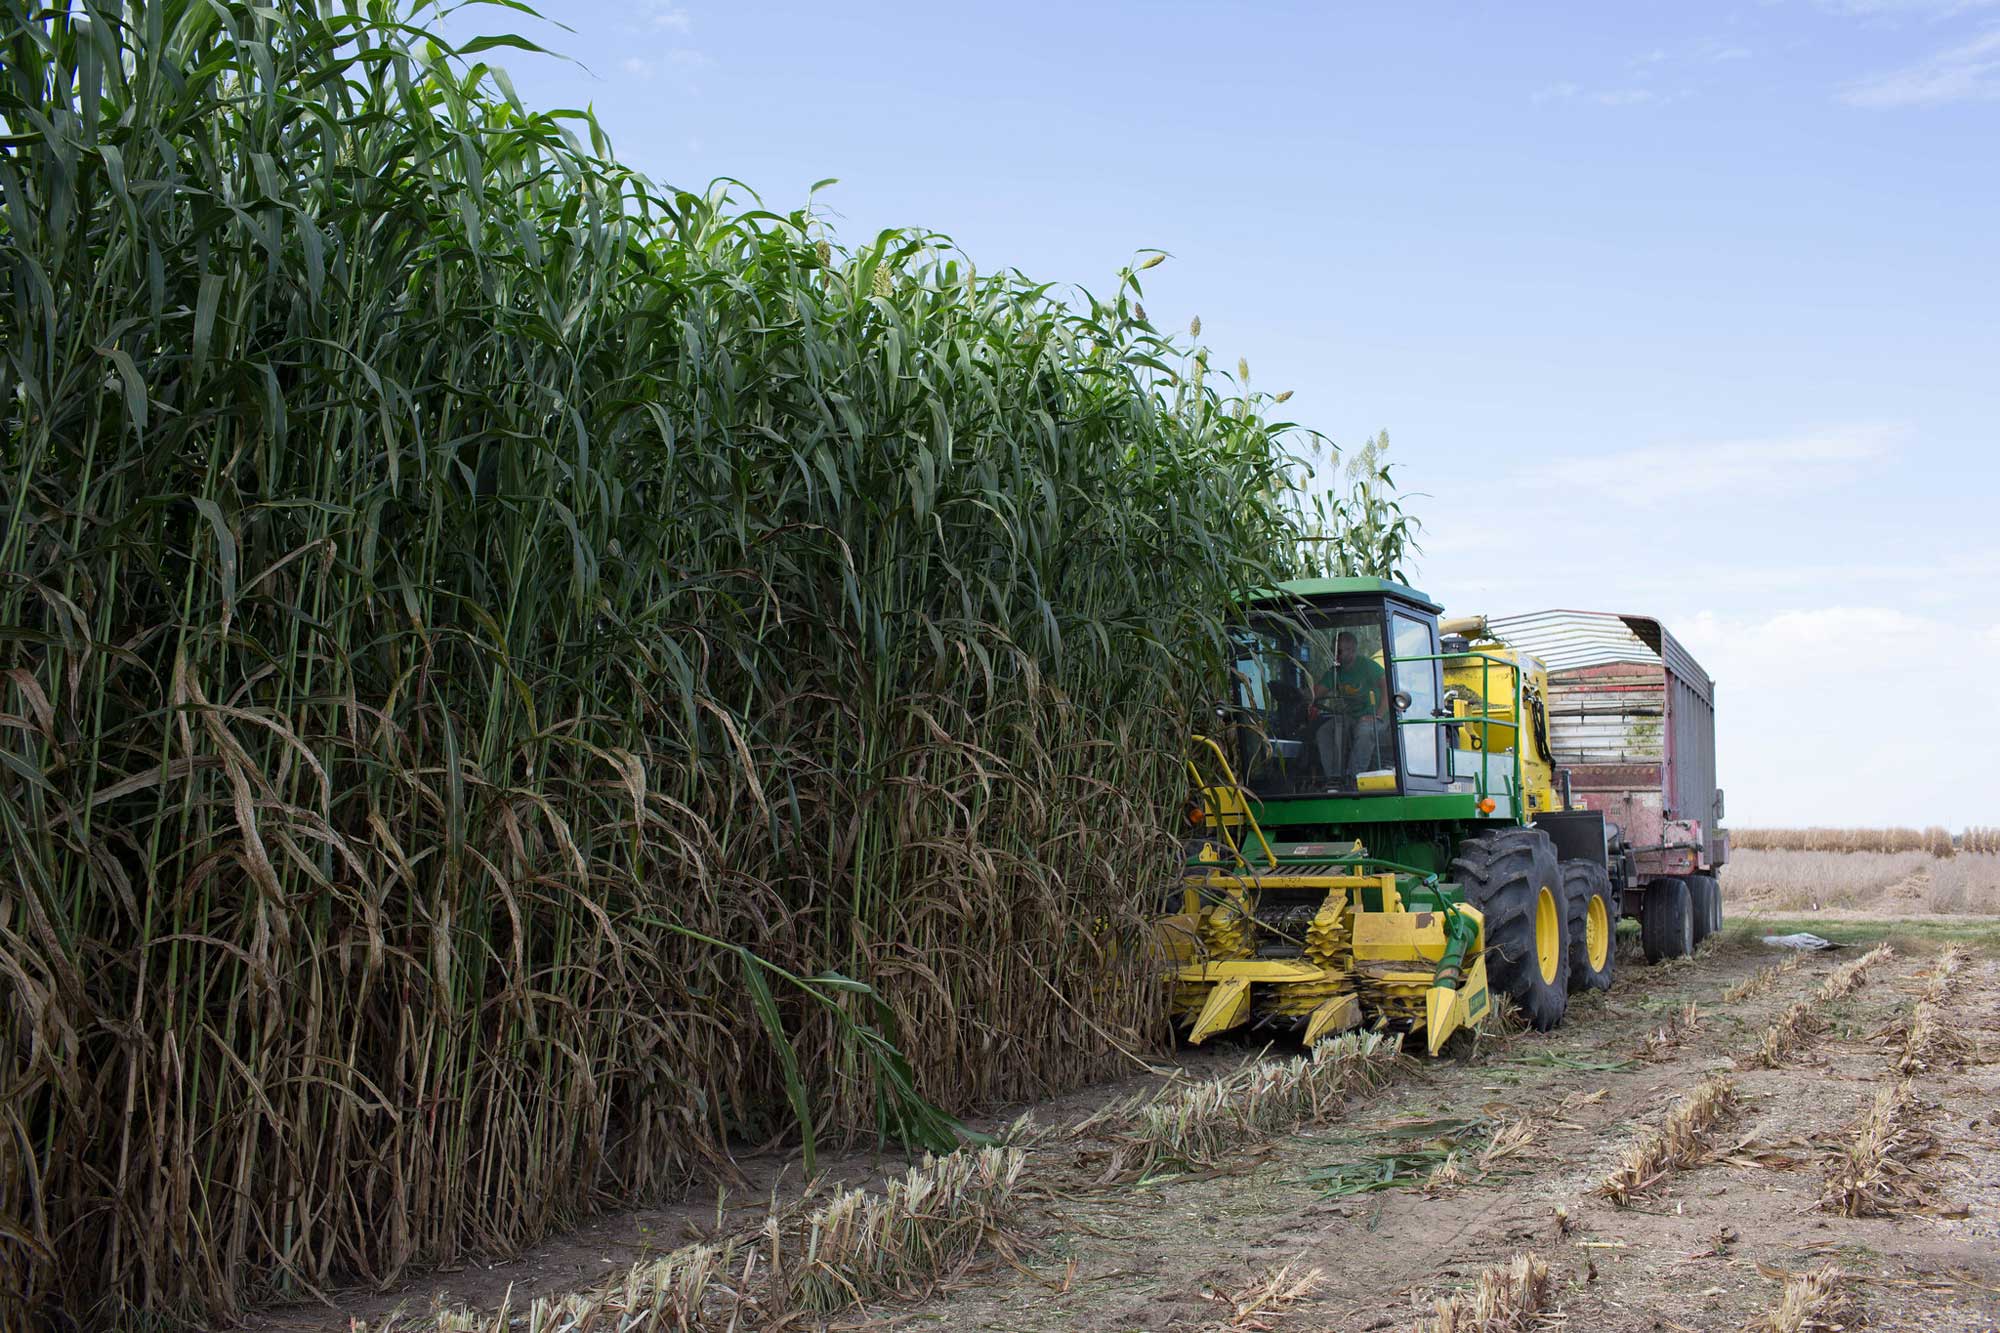 Photograph of a field of tall sorghum plants being machine-harvested. The photo sows a tractor with a harvesting attachment on the front and a wagon behind. A man in an enclosed cab operates the tactor. The sorghum plants are taller than the tractor.